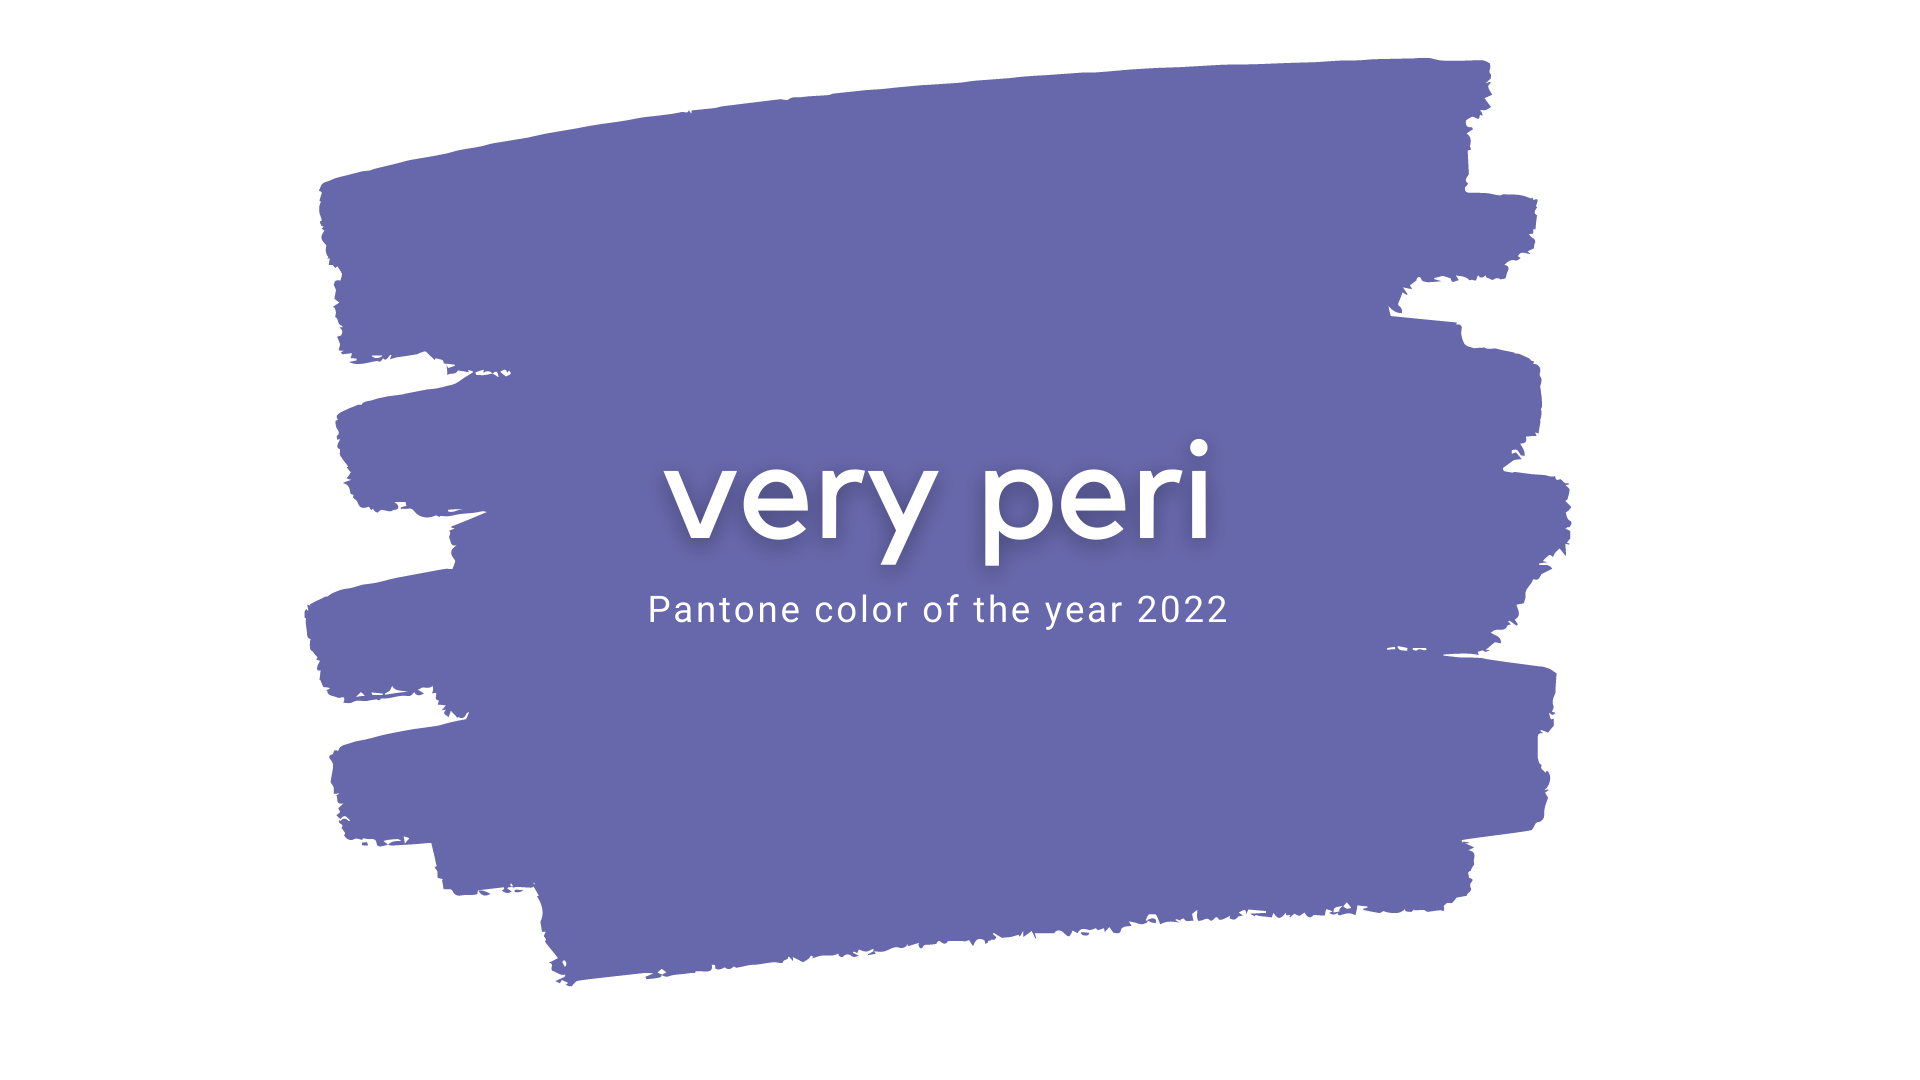 Very peri: the Pantone color of the year 2022